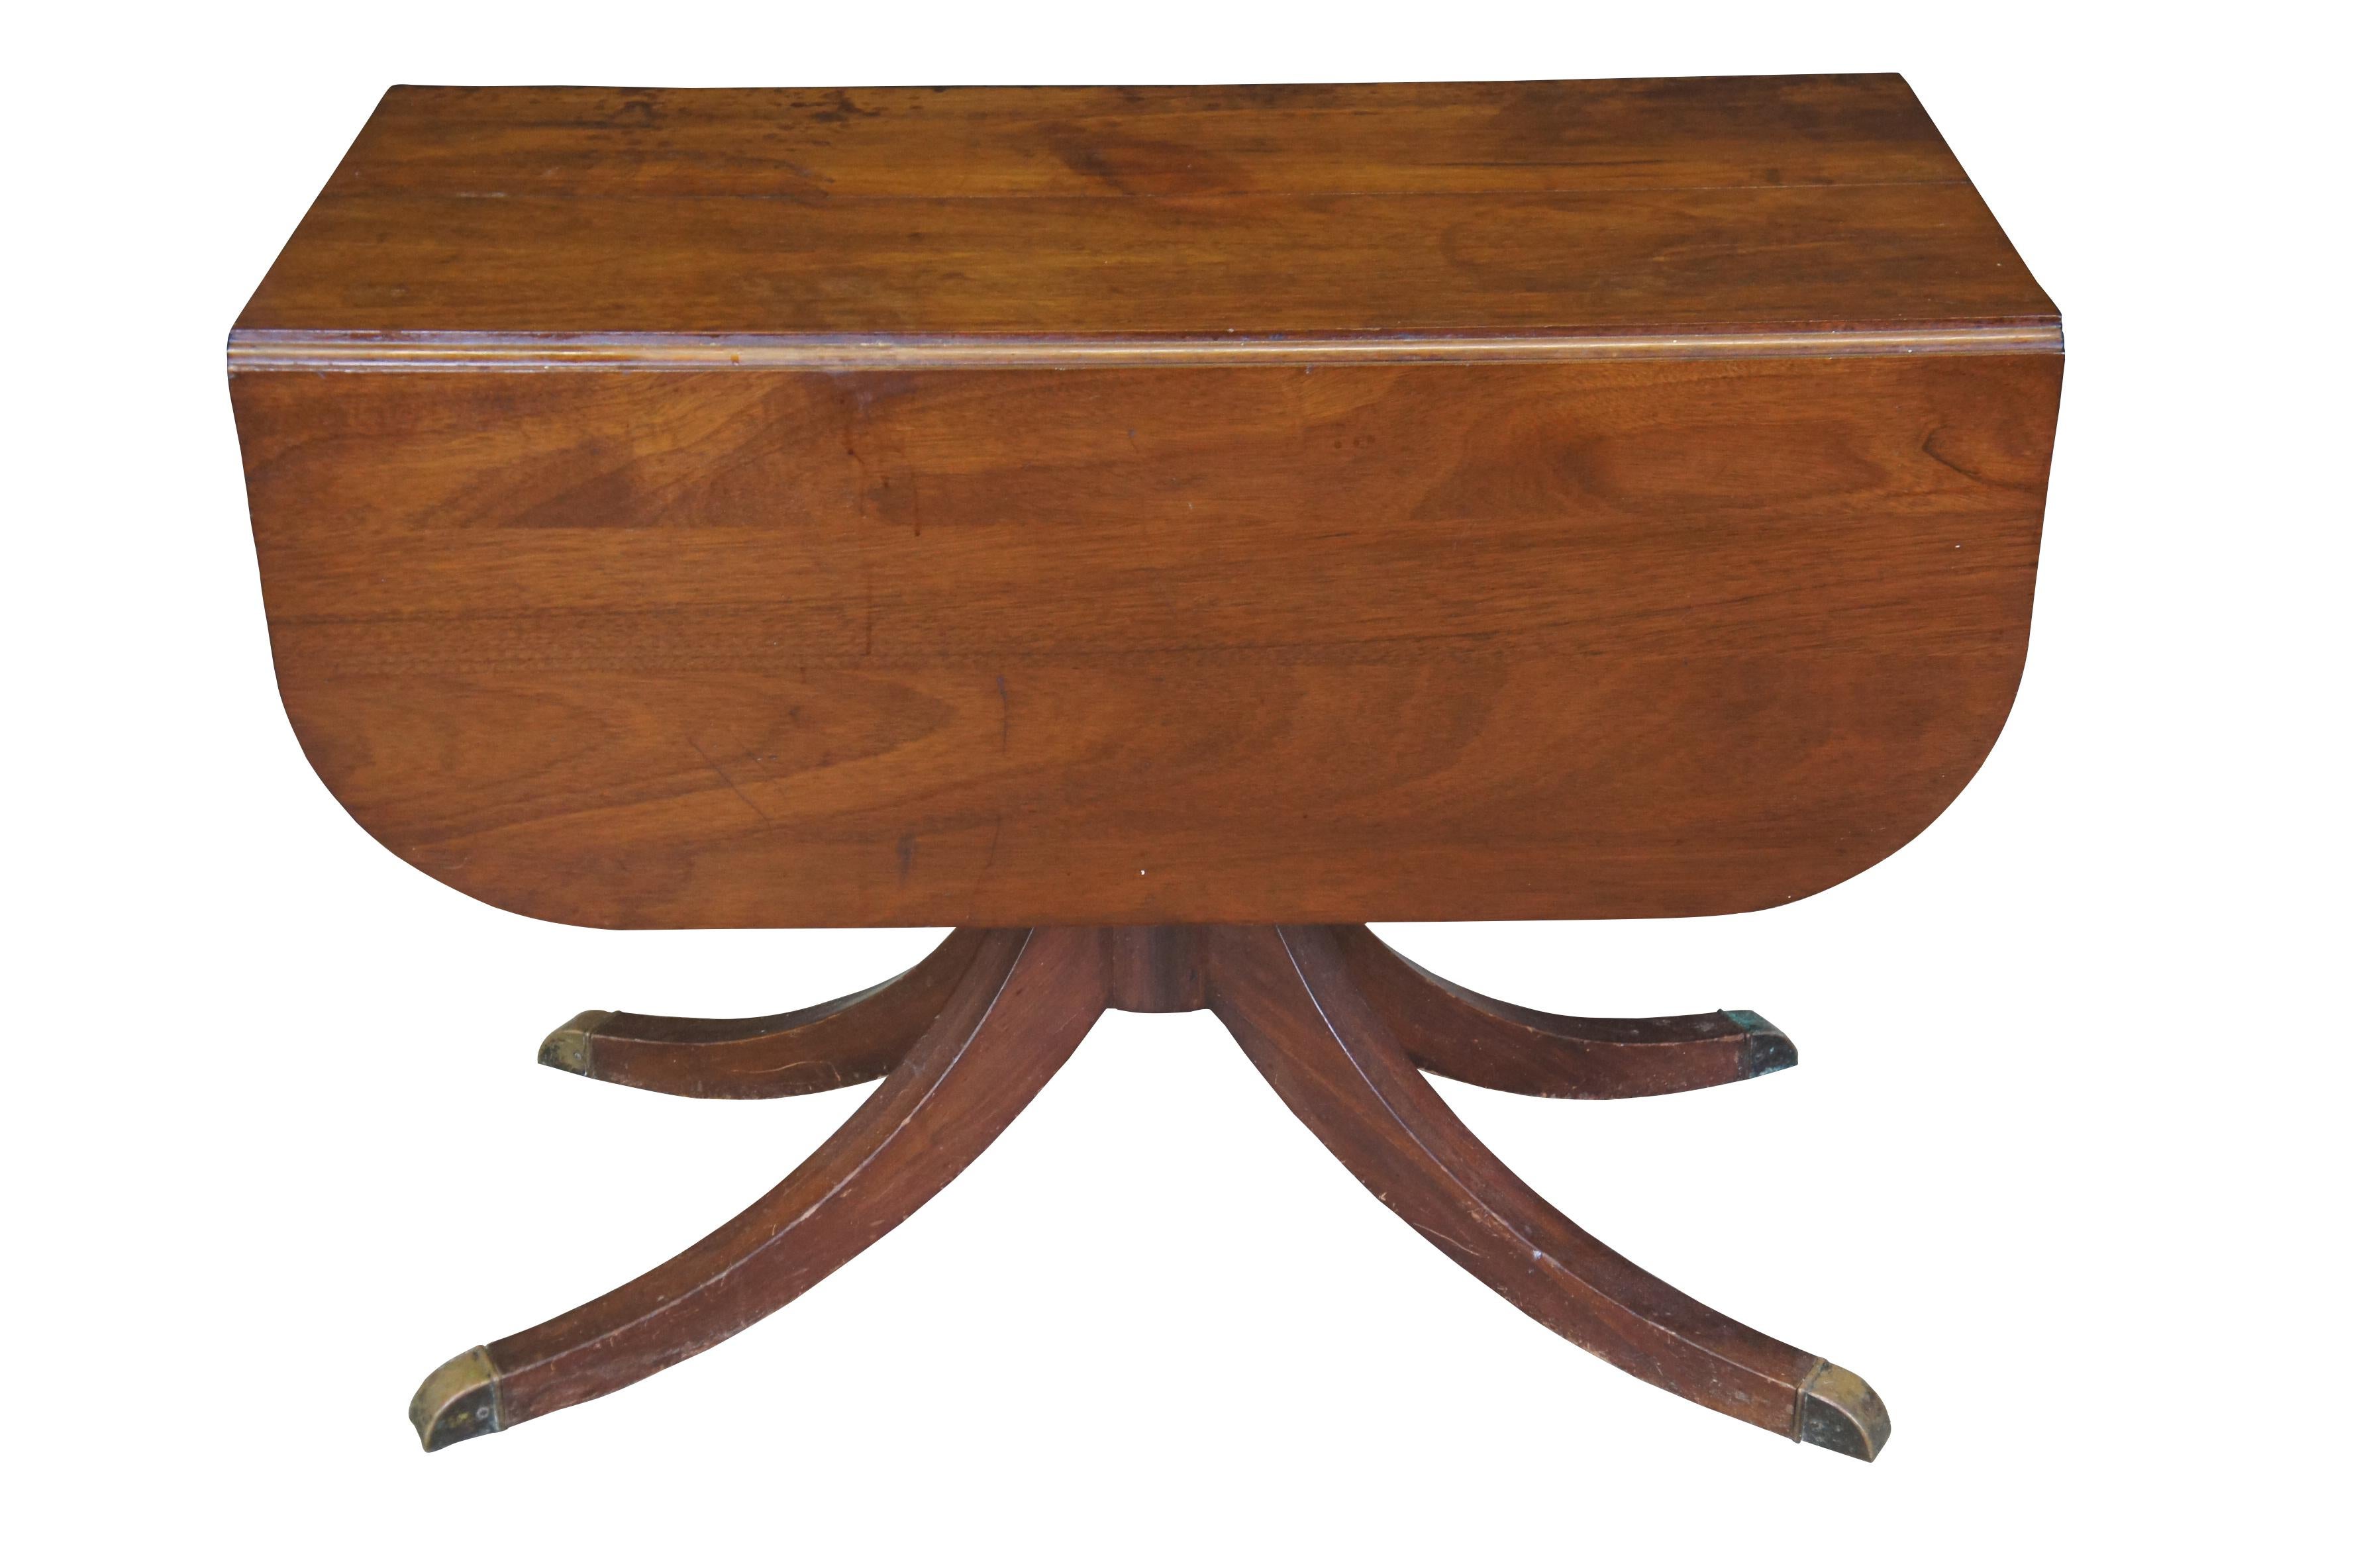 Antique drop leaf game or dining table.  Made of mahogany featuring Duncan Phyfe styling with brass capped feet and extendable top.

Dimensions:
21